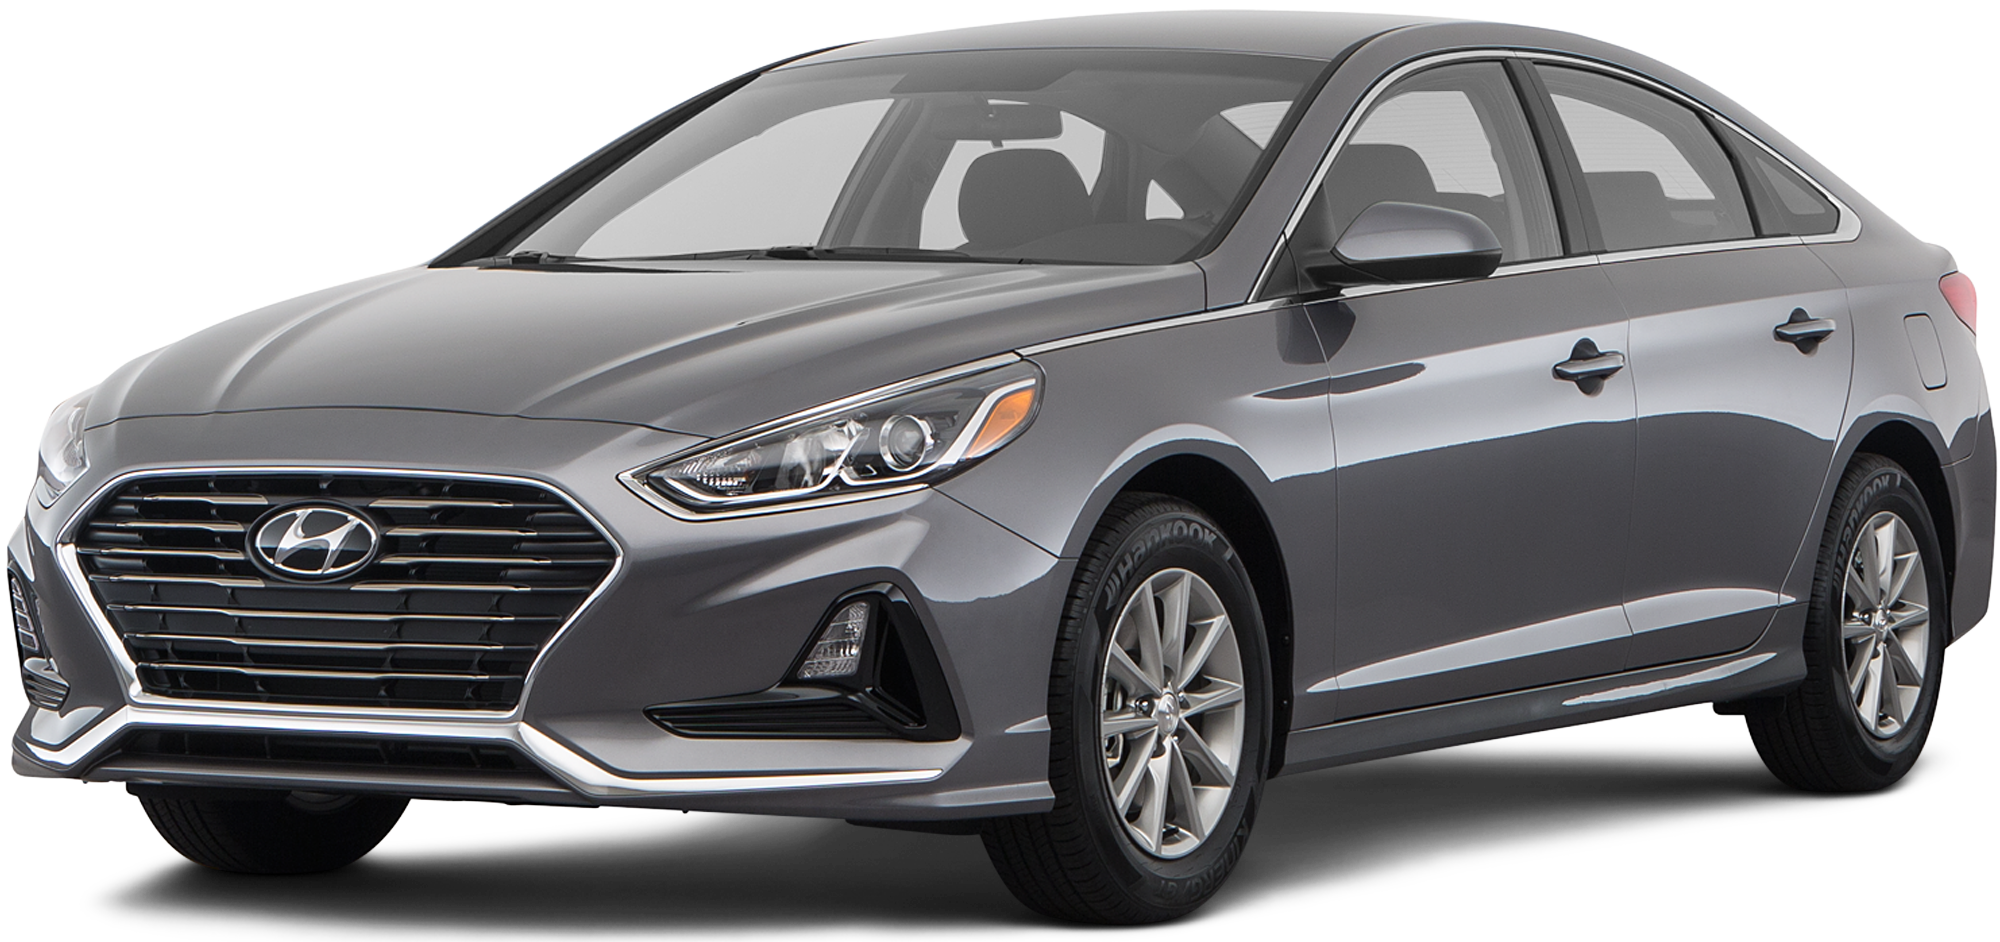 2019 Hyundai Sonata Incentives, Specials & Offers in Amherst NY